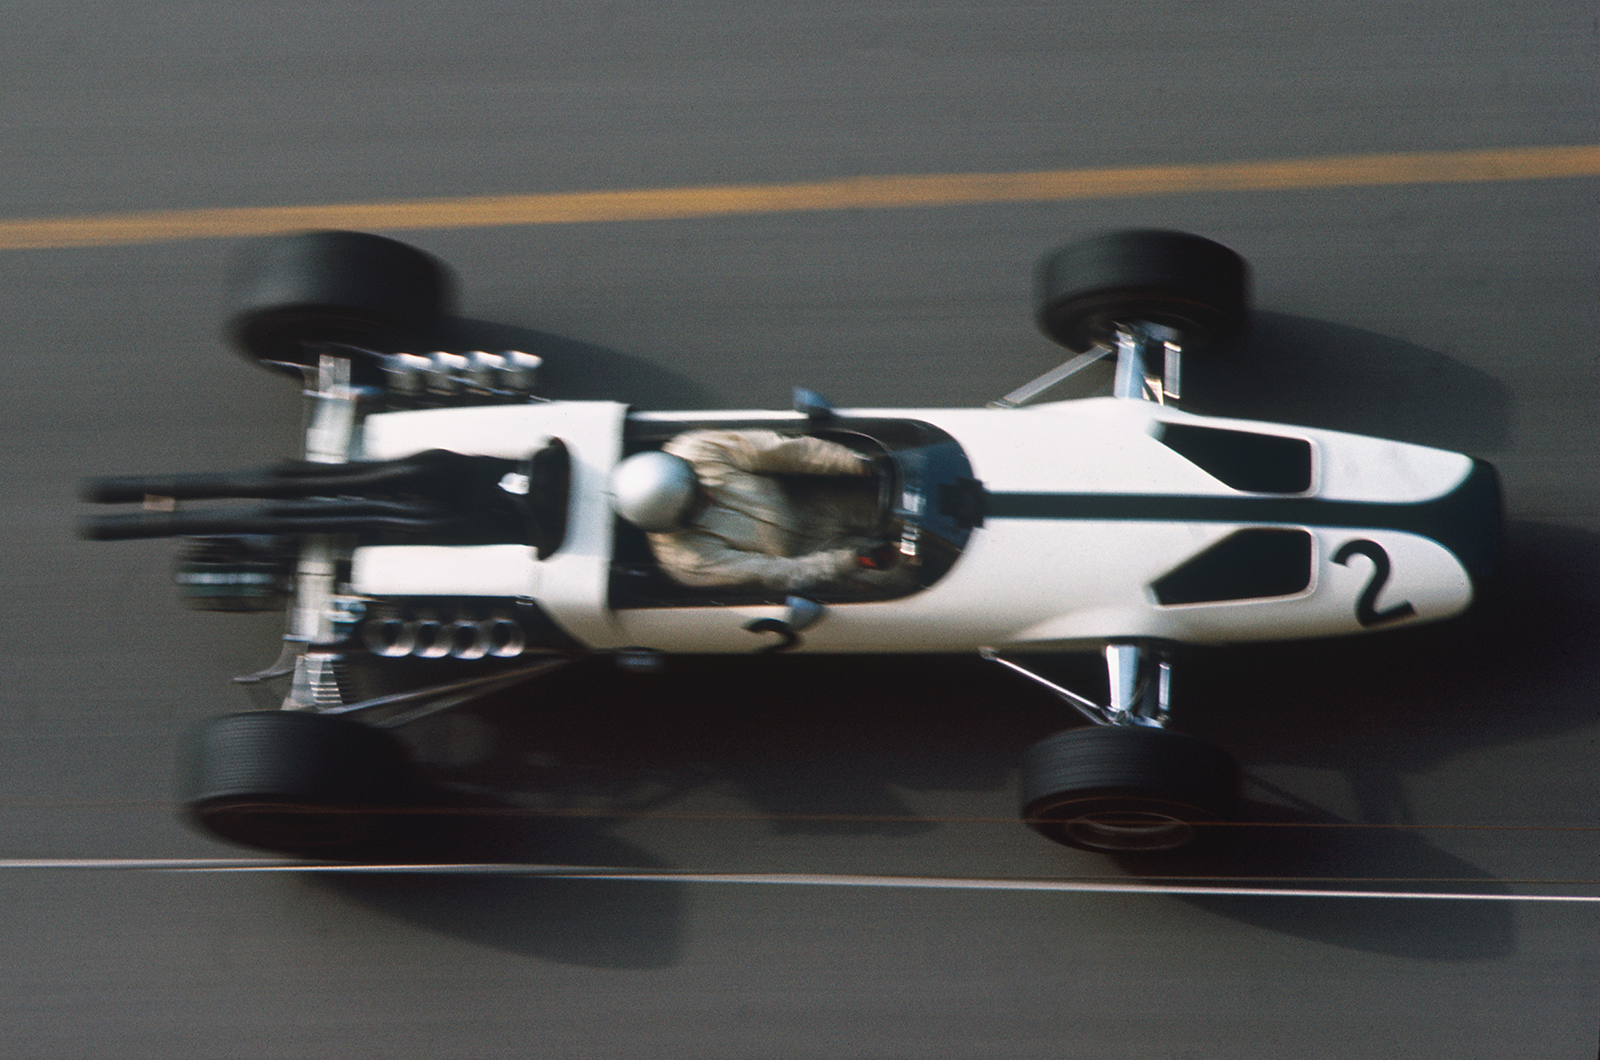 McLaren made its team debut at Monte-Carlo in ’66, Bruce McLaren piloting the Ford-engined M2B Ford